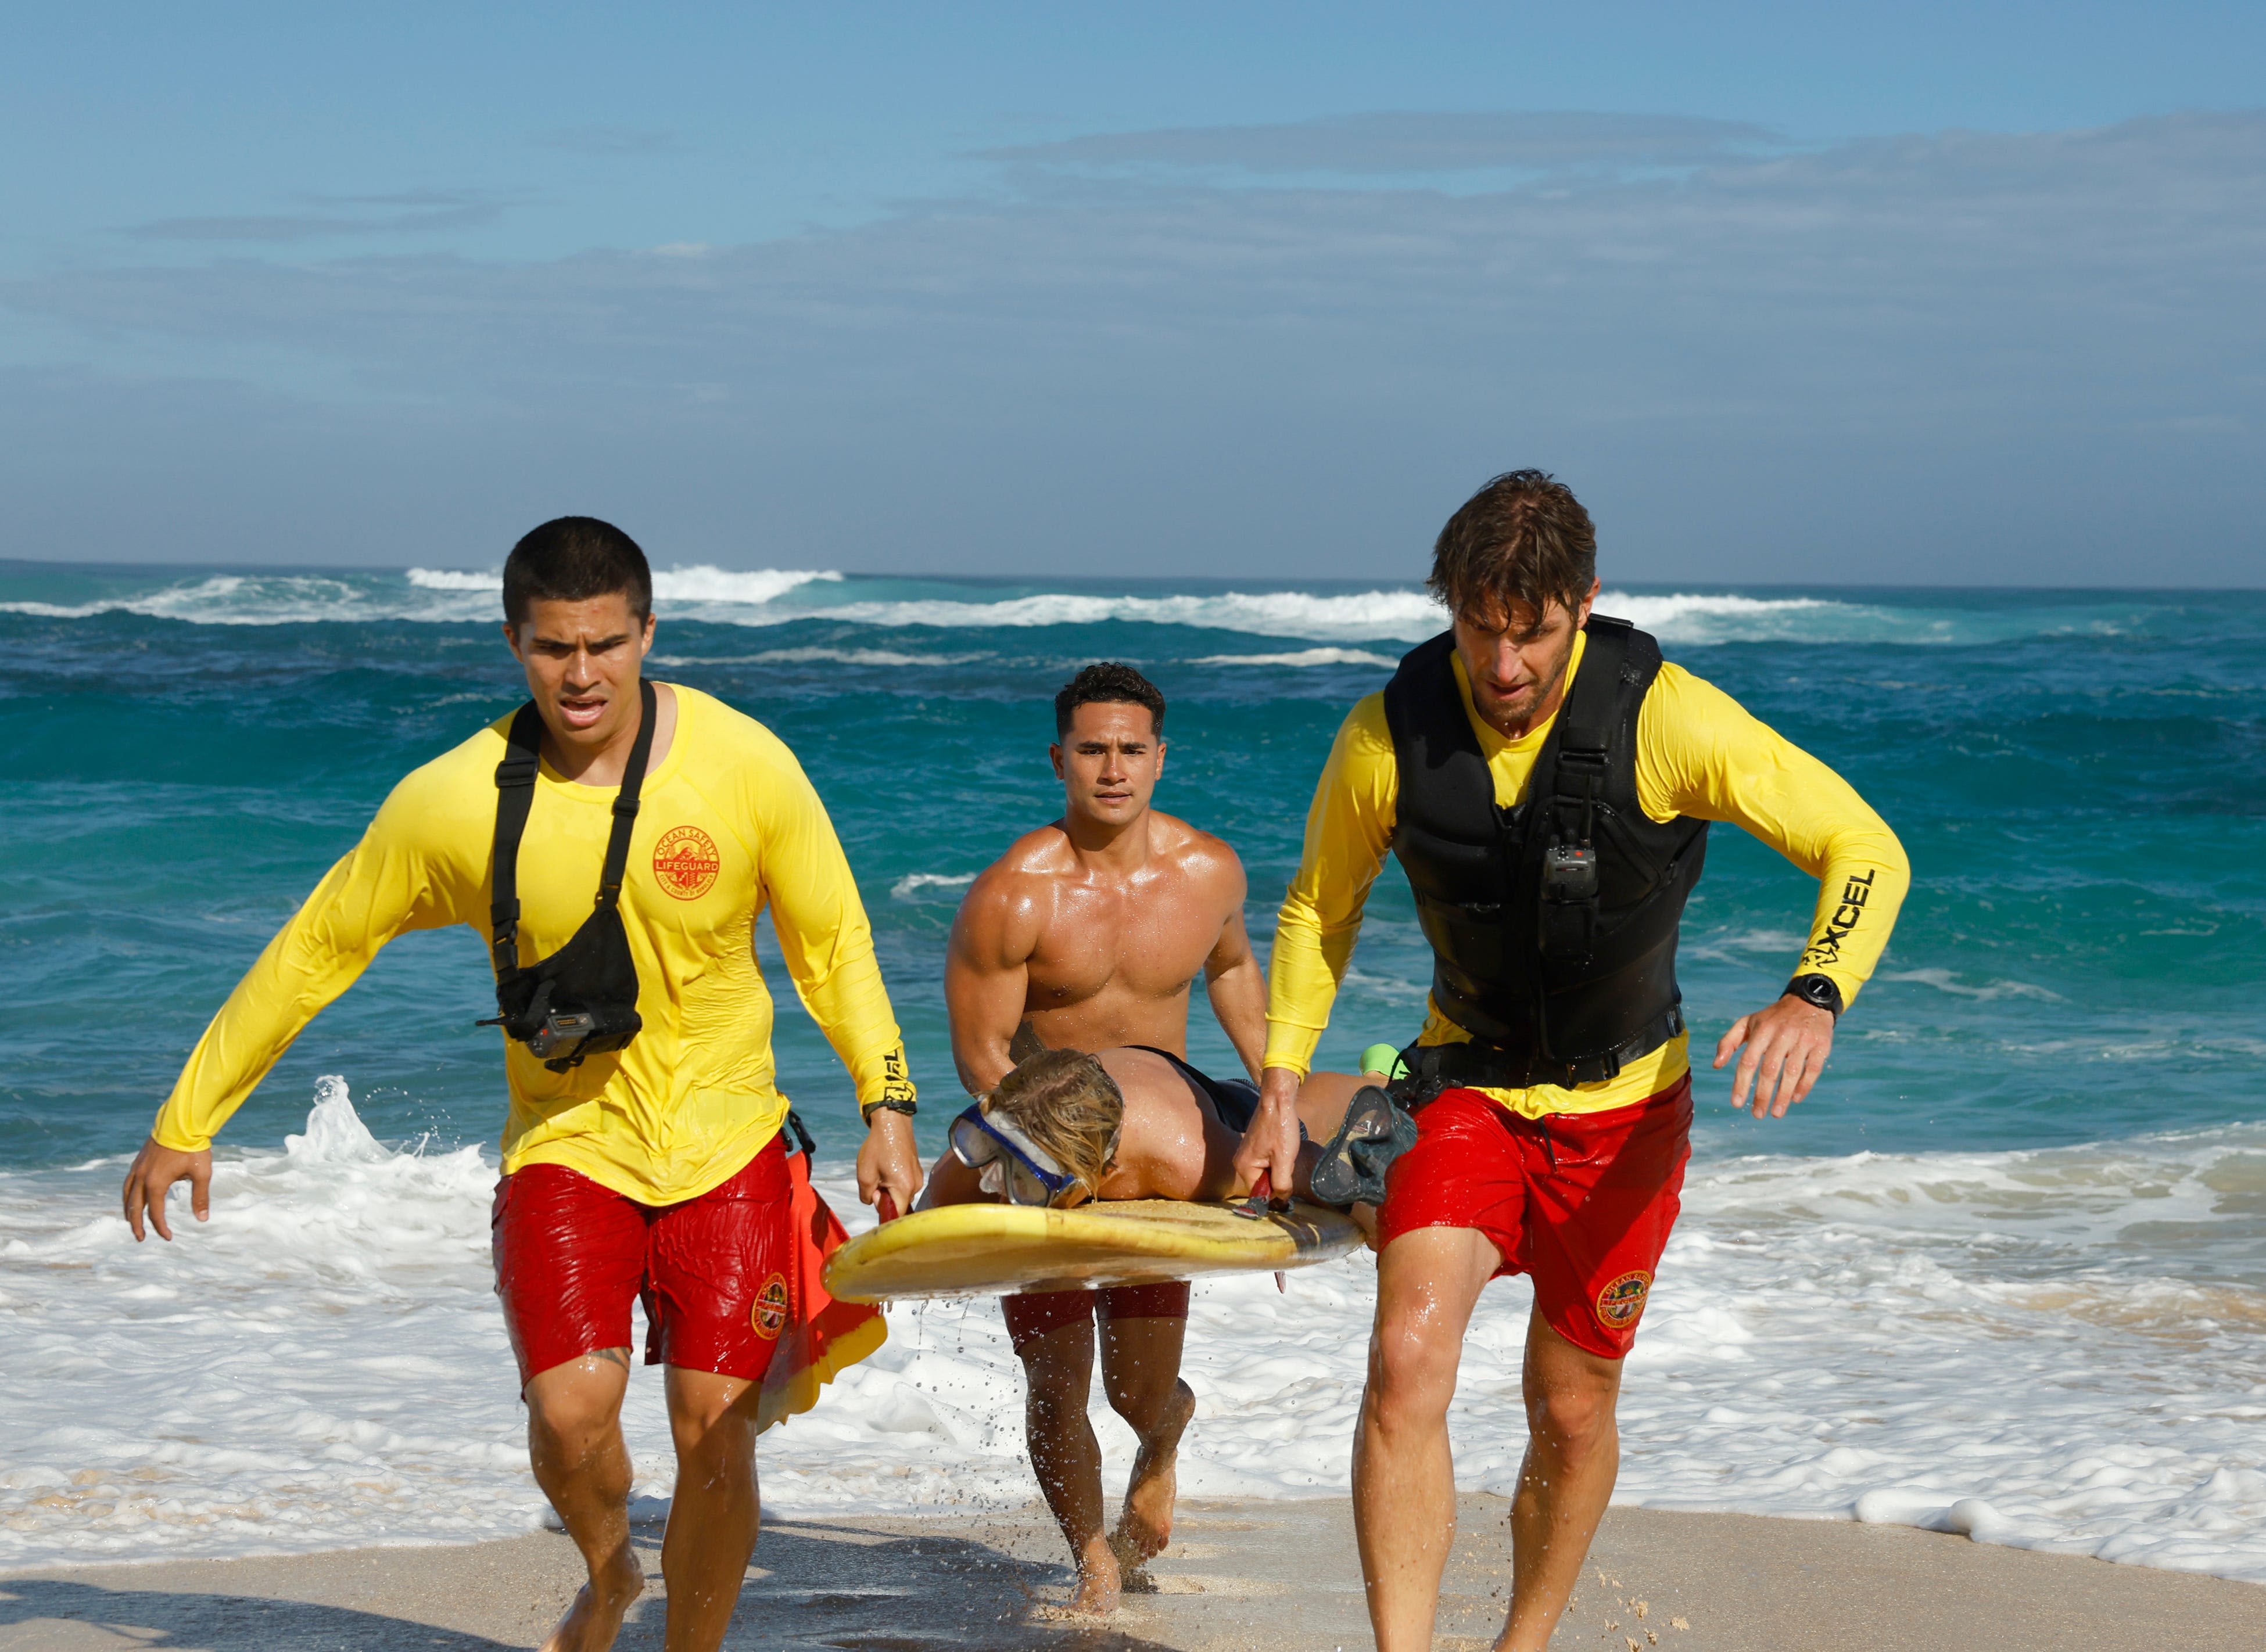 Fox to the 'Rescue' this fall with 'Baywatch'-style lifeguard drama, 'Murder in a Small Town'